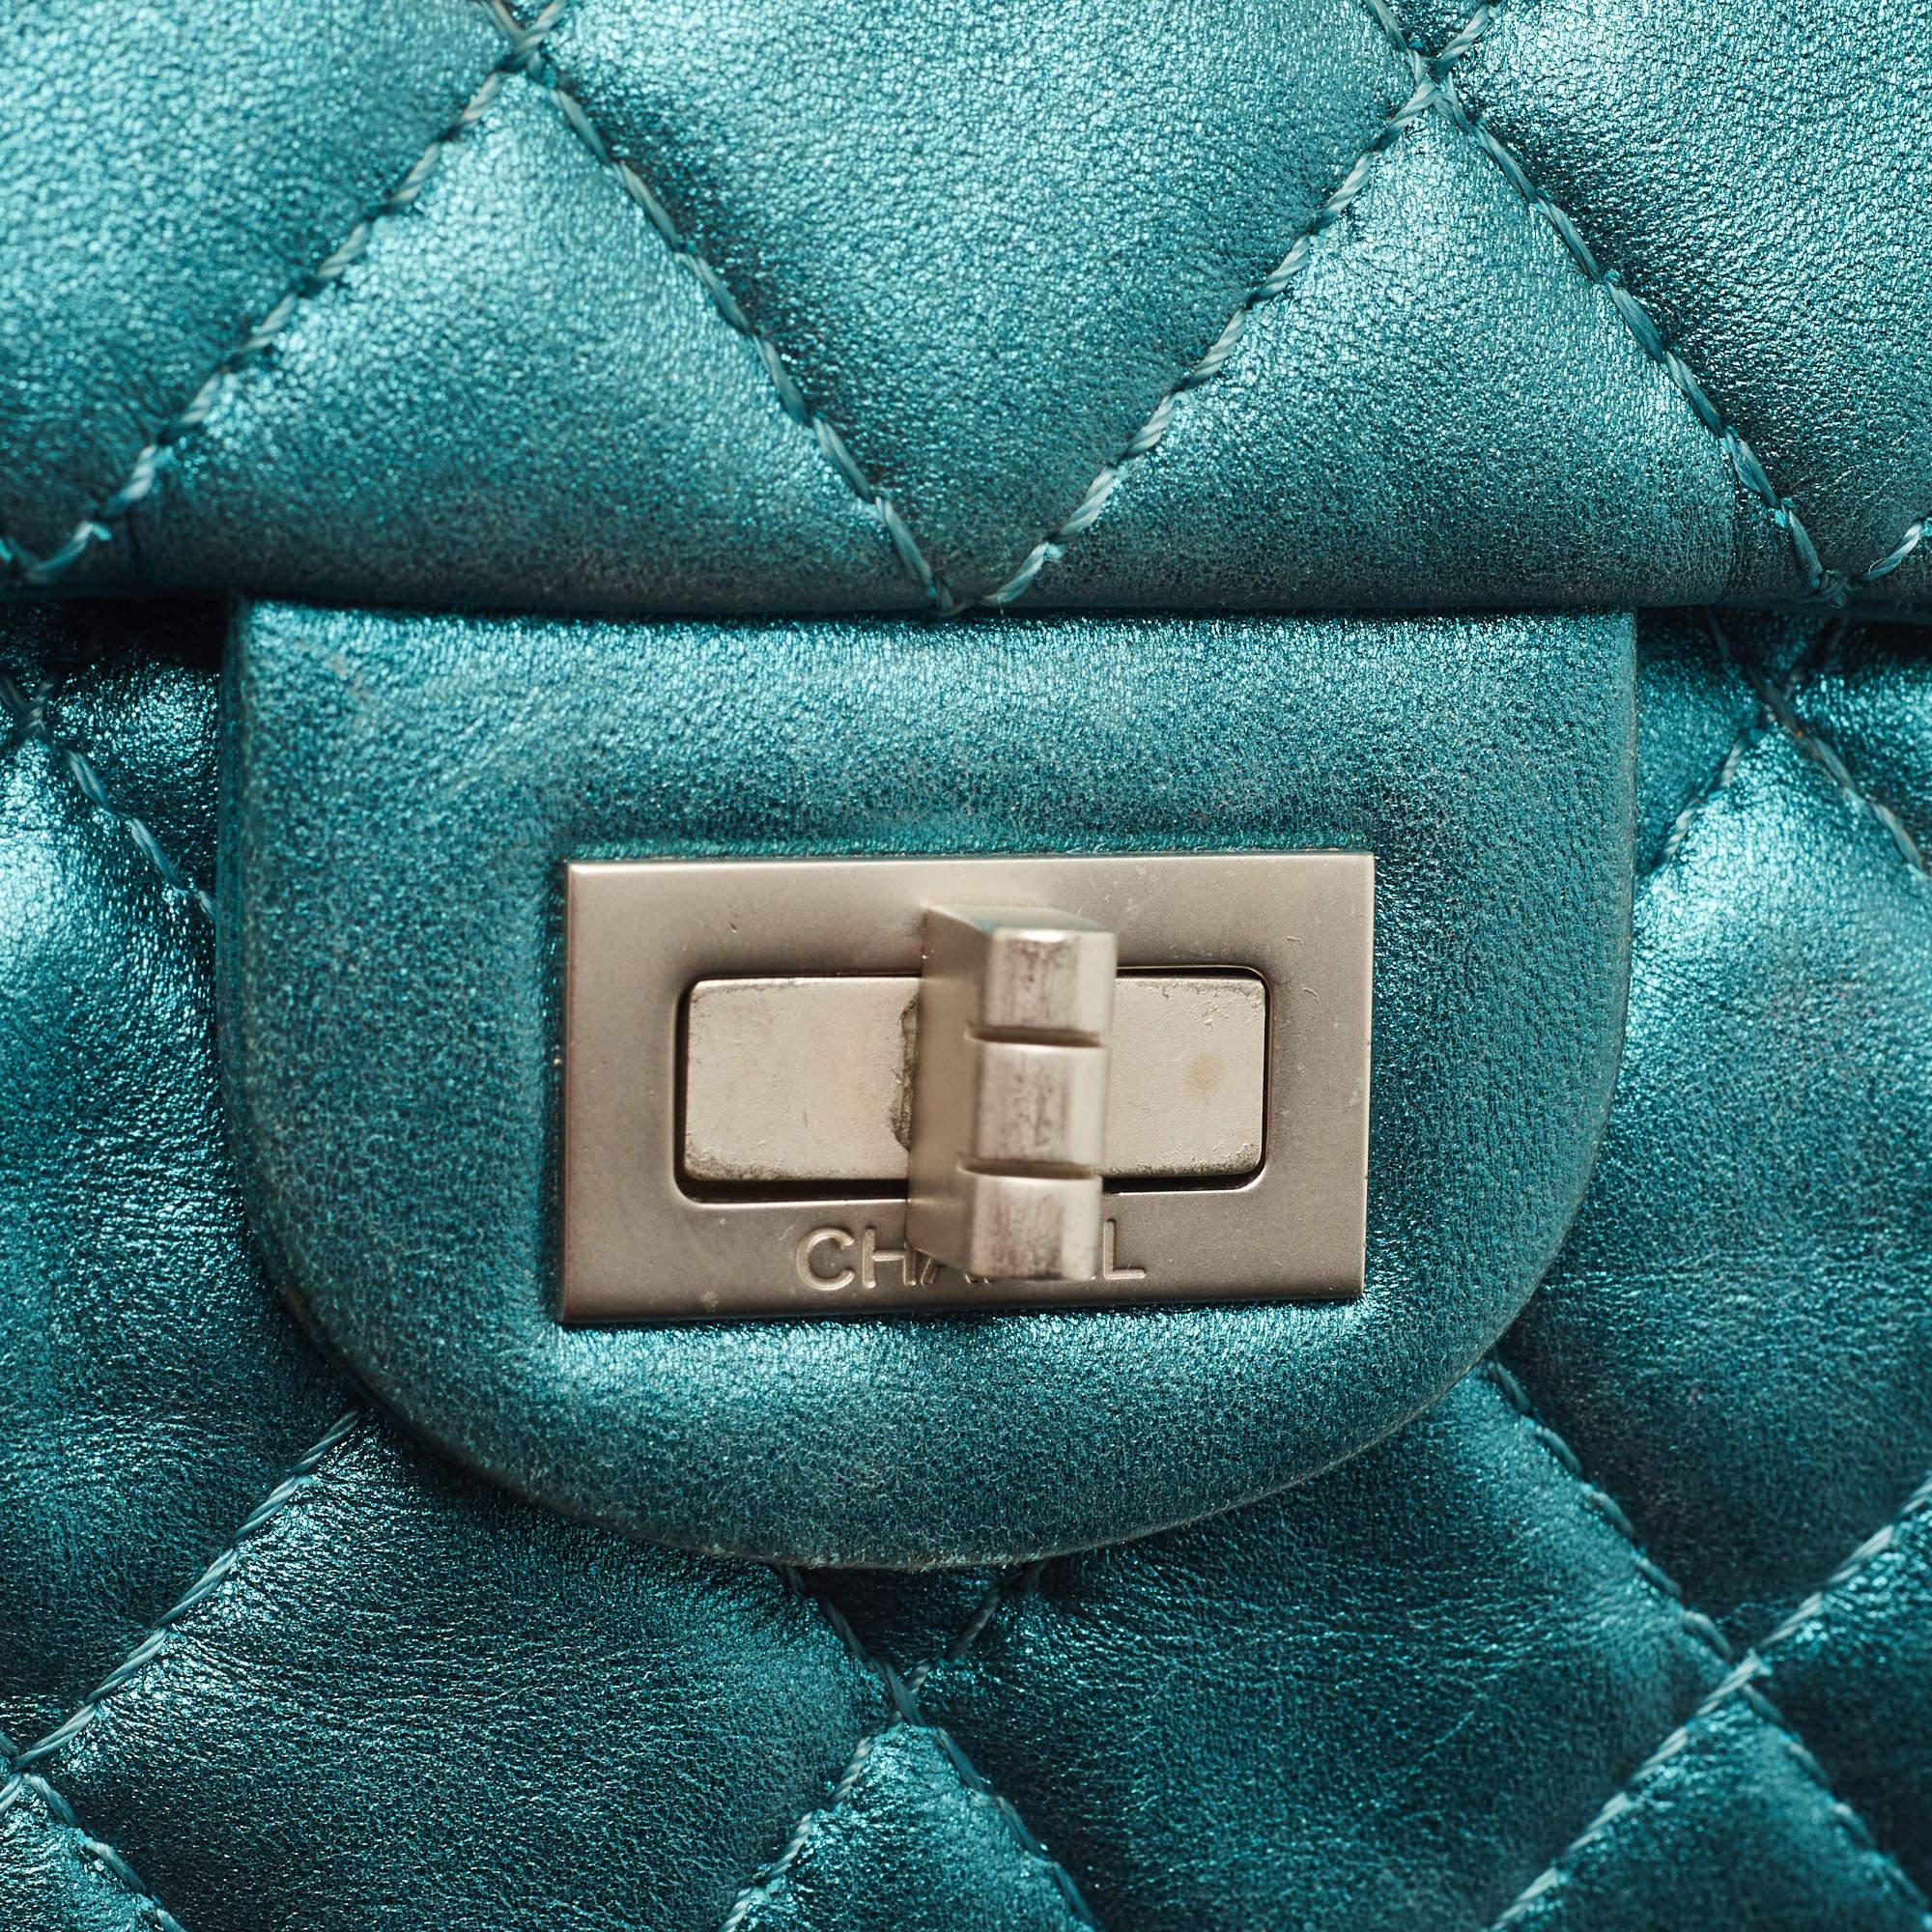 Chanel Metallic Teal Green Quilted Leather Reissue 2.55 Classic 226 Flap Bag For Sale 2